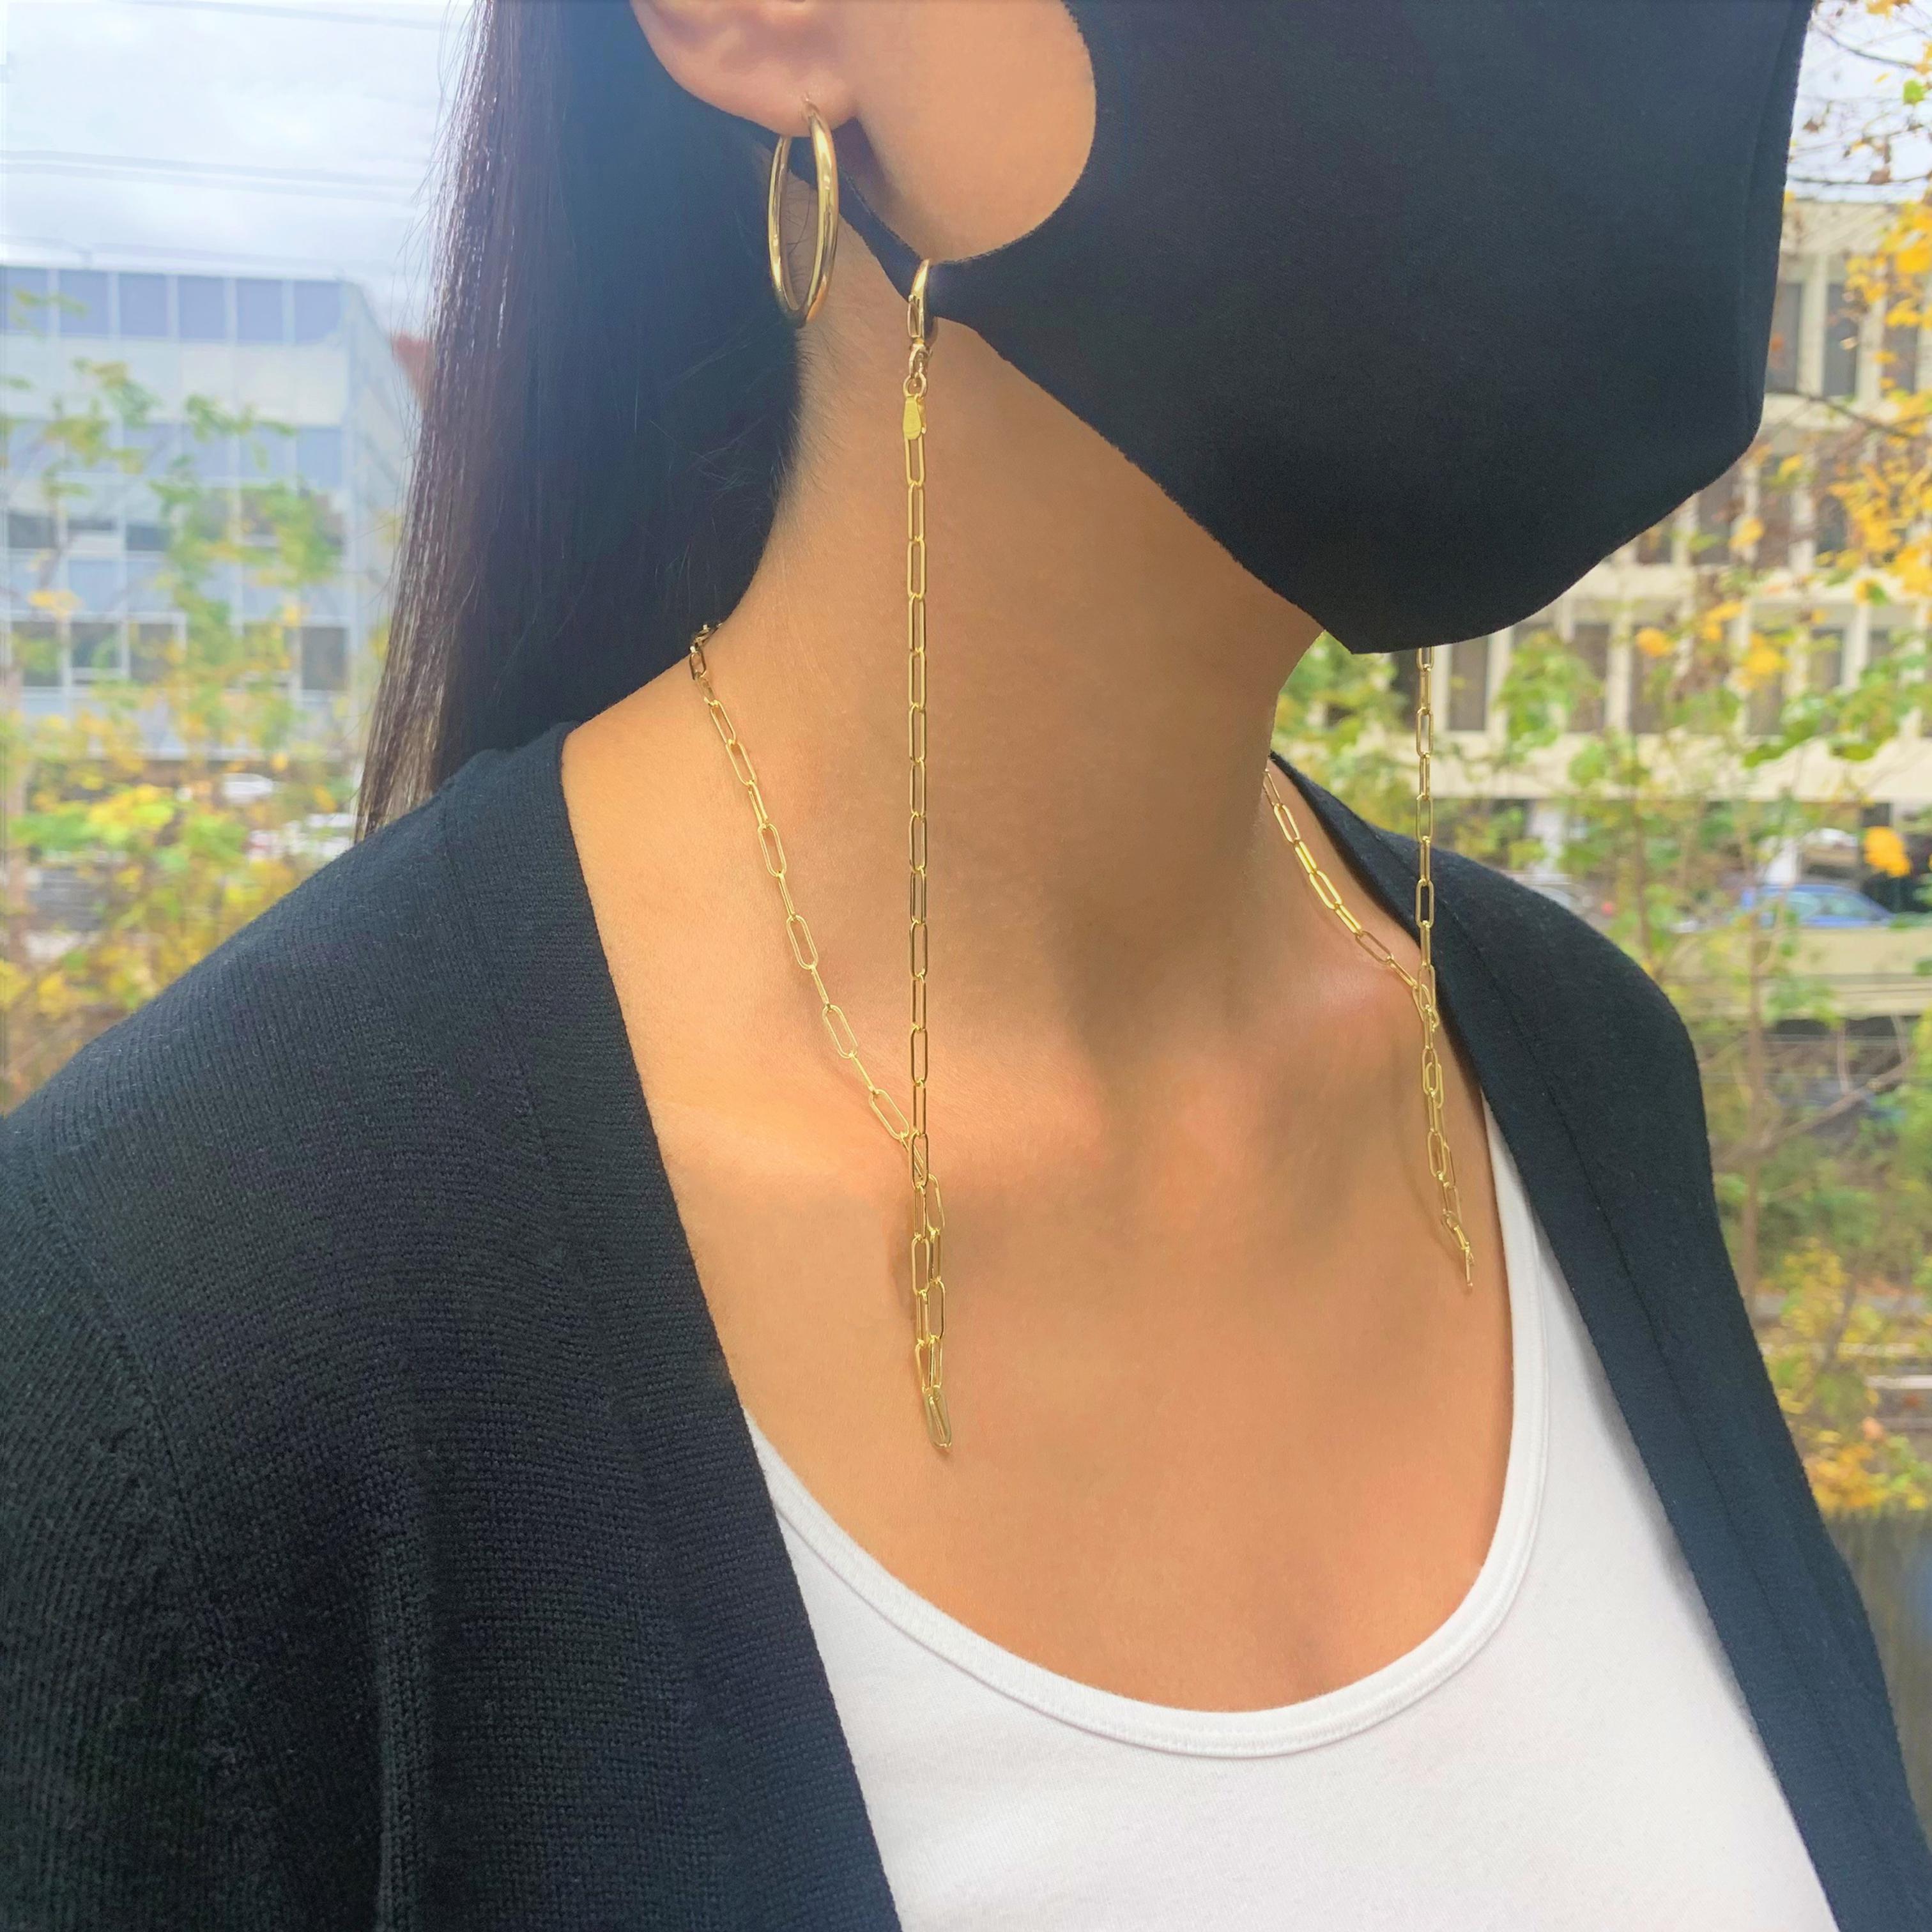 Style meets function with our 14K Yellow Gold Paperclip convertible Chain Mask Necklace. Made to keep your newfound essential within reach at all times, simply hook the chain to the ear loops of your favorite face covering. When you're not wearing